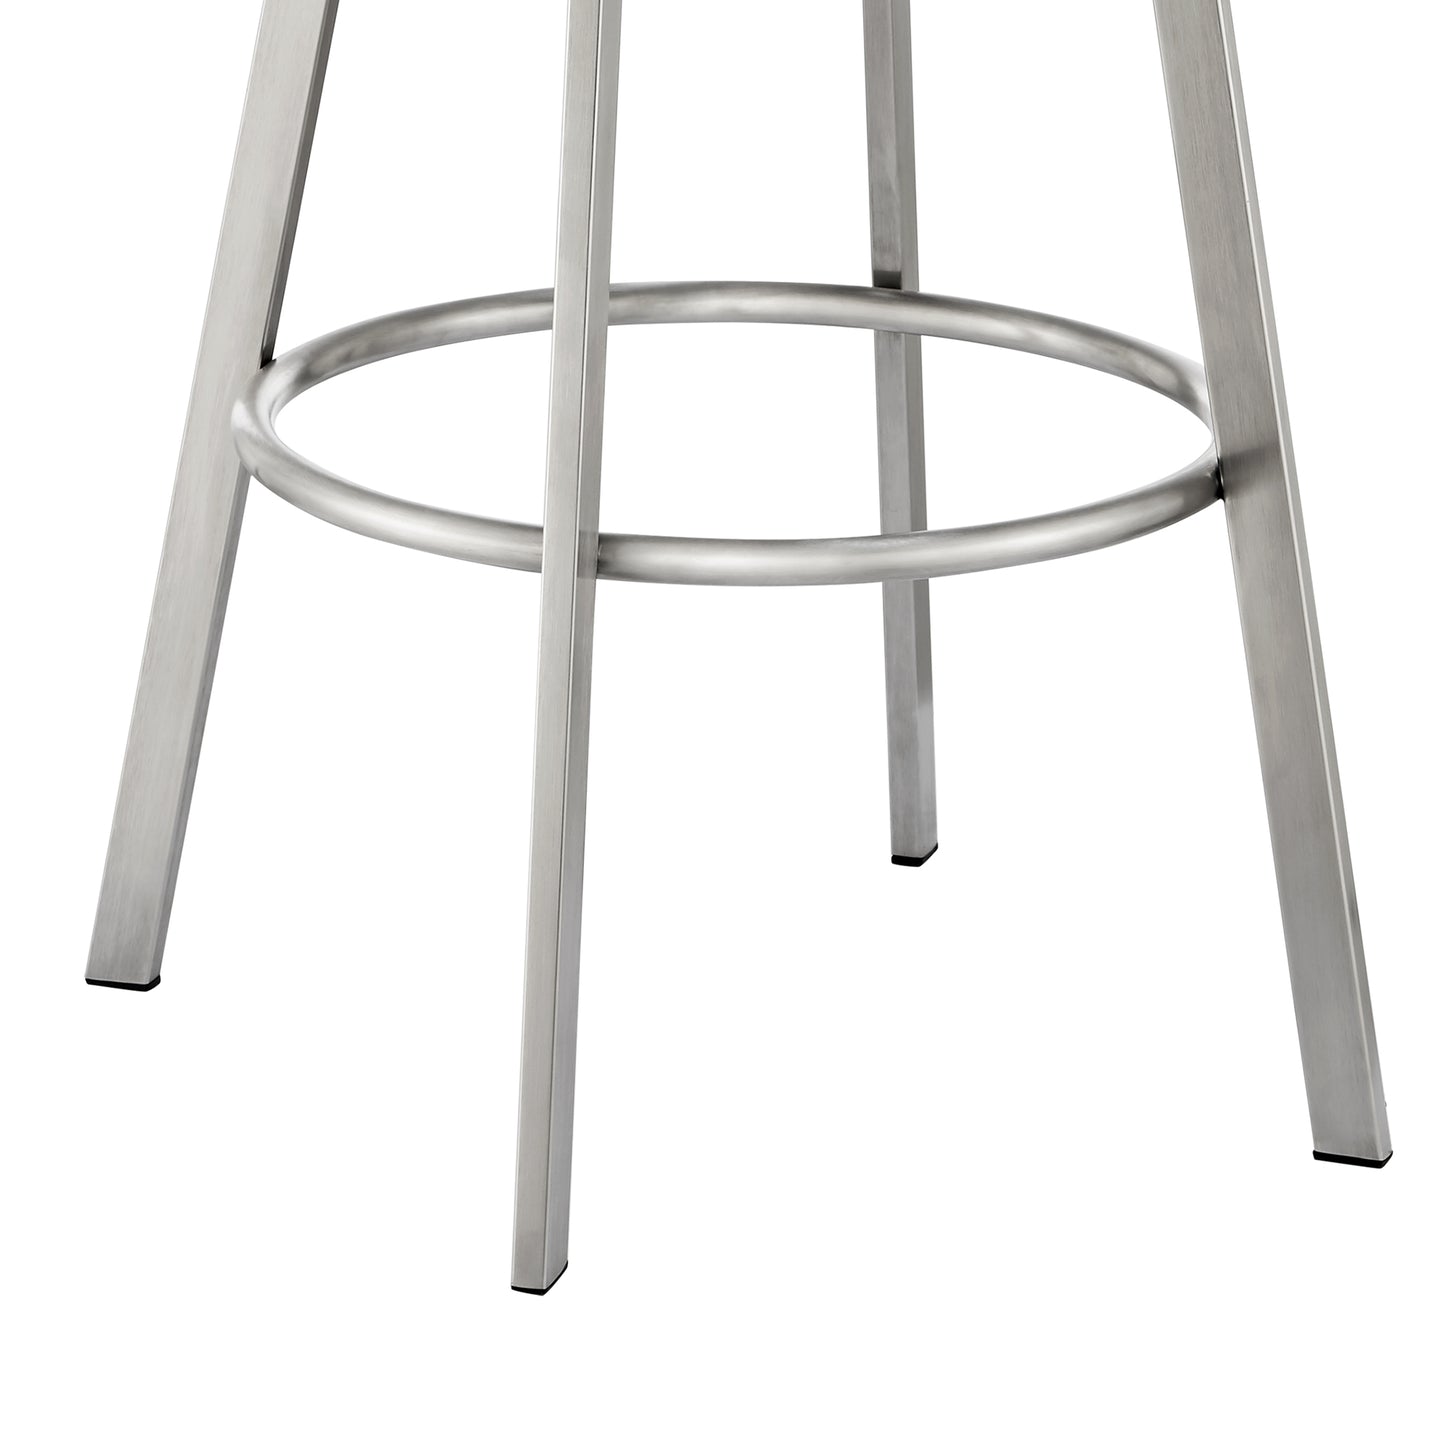 Eleanor 30" Swivel Bar Stool in Brushed Stainless Steel with Gray Faux Leather